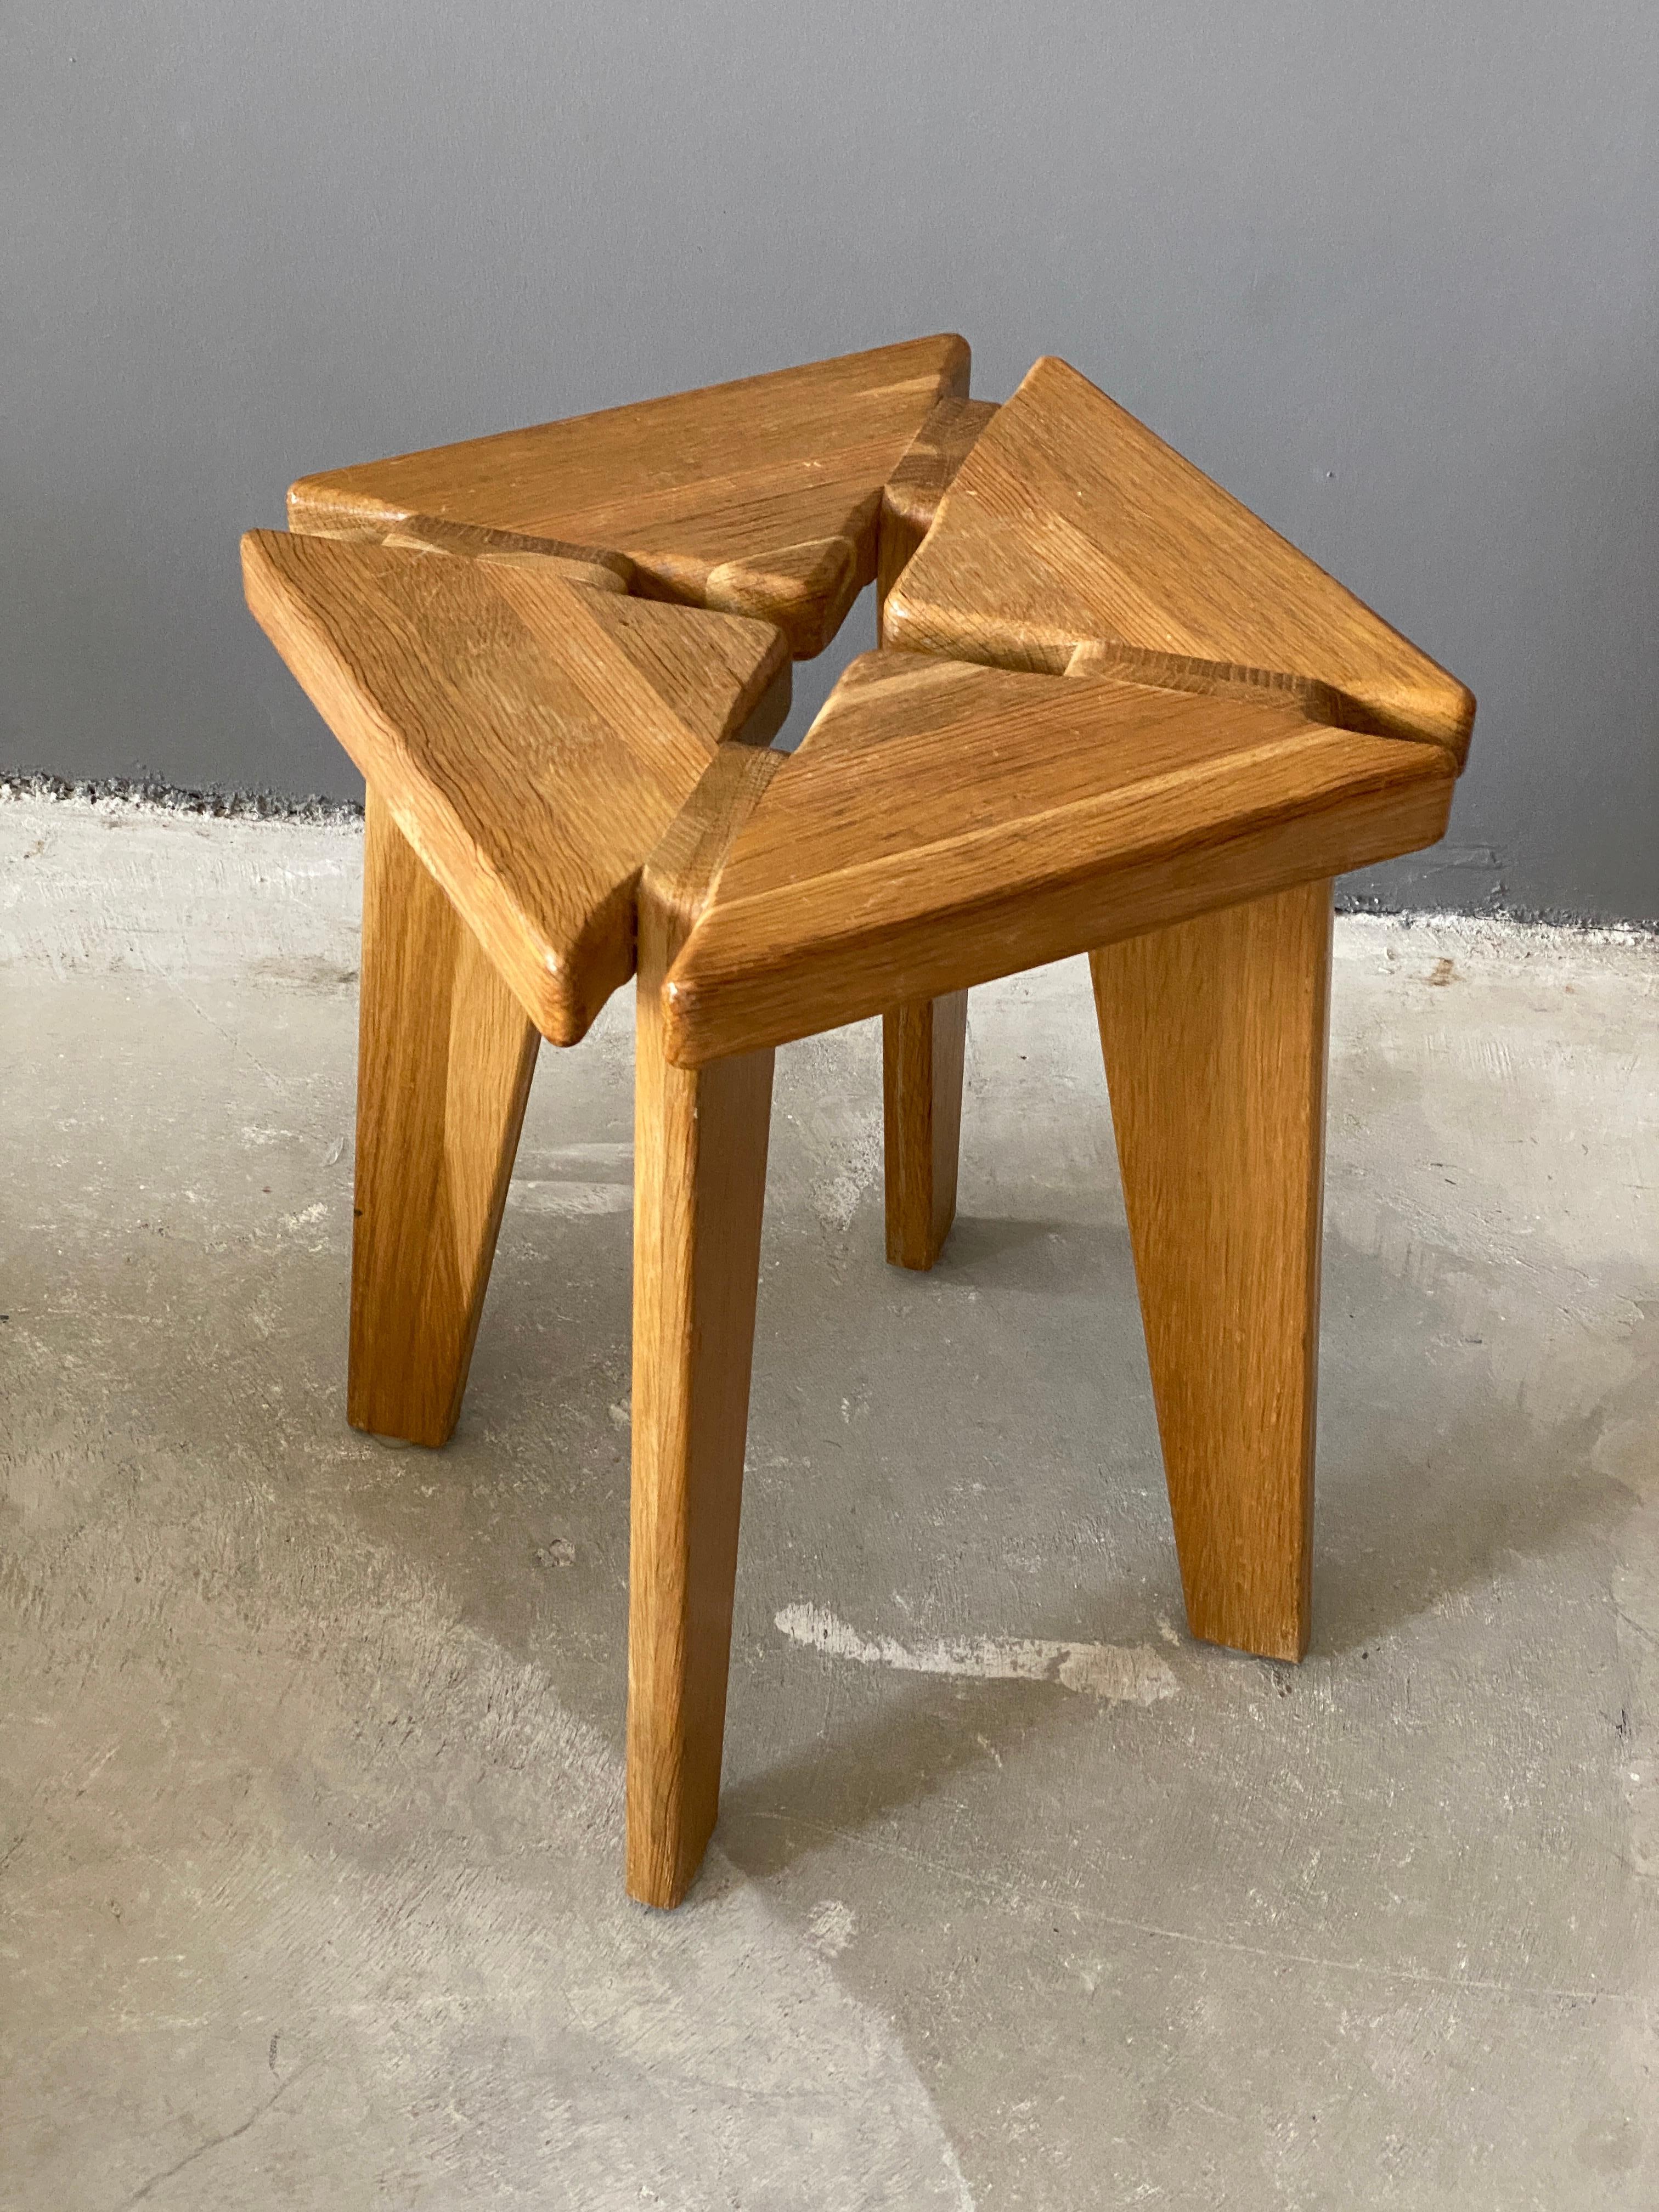 A handmade Minimalist stool, designed and produced in Sweden, 1970s. In finely sculpted solid pine. 

Other designers of the 20th century working in pine include Charlotte Perriand, Lisa-Johansson Pape, Pierre Chapo, and Axel Einar Hjorth.